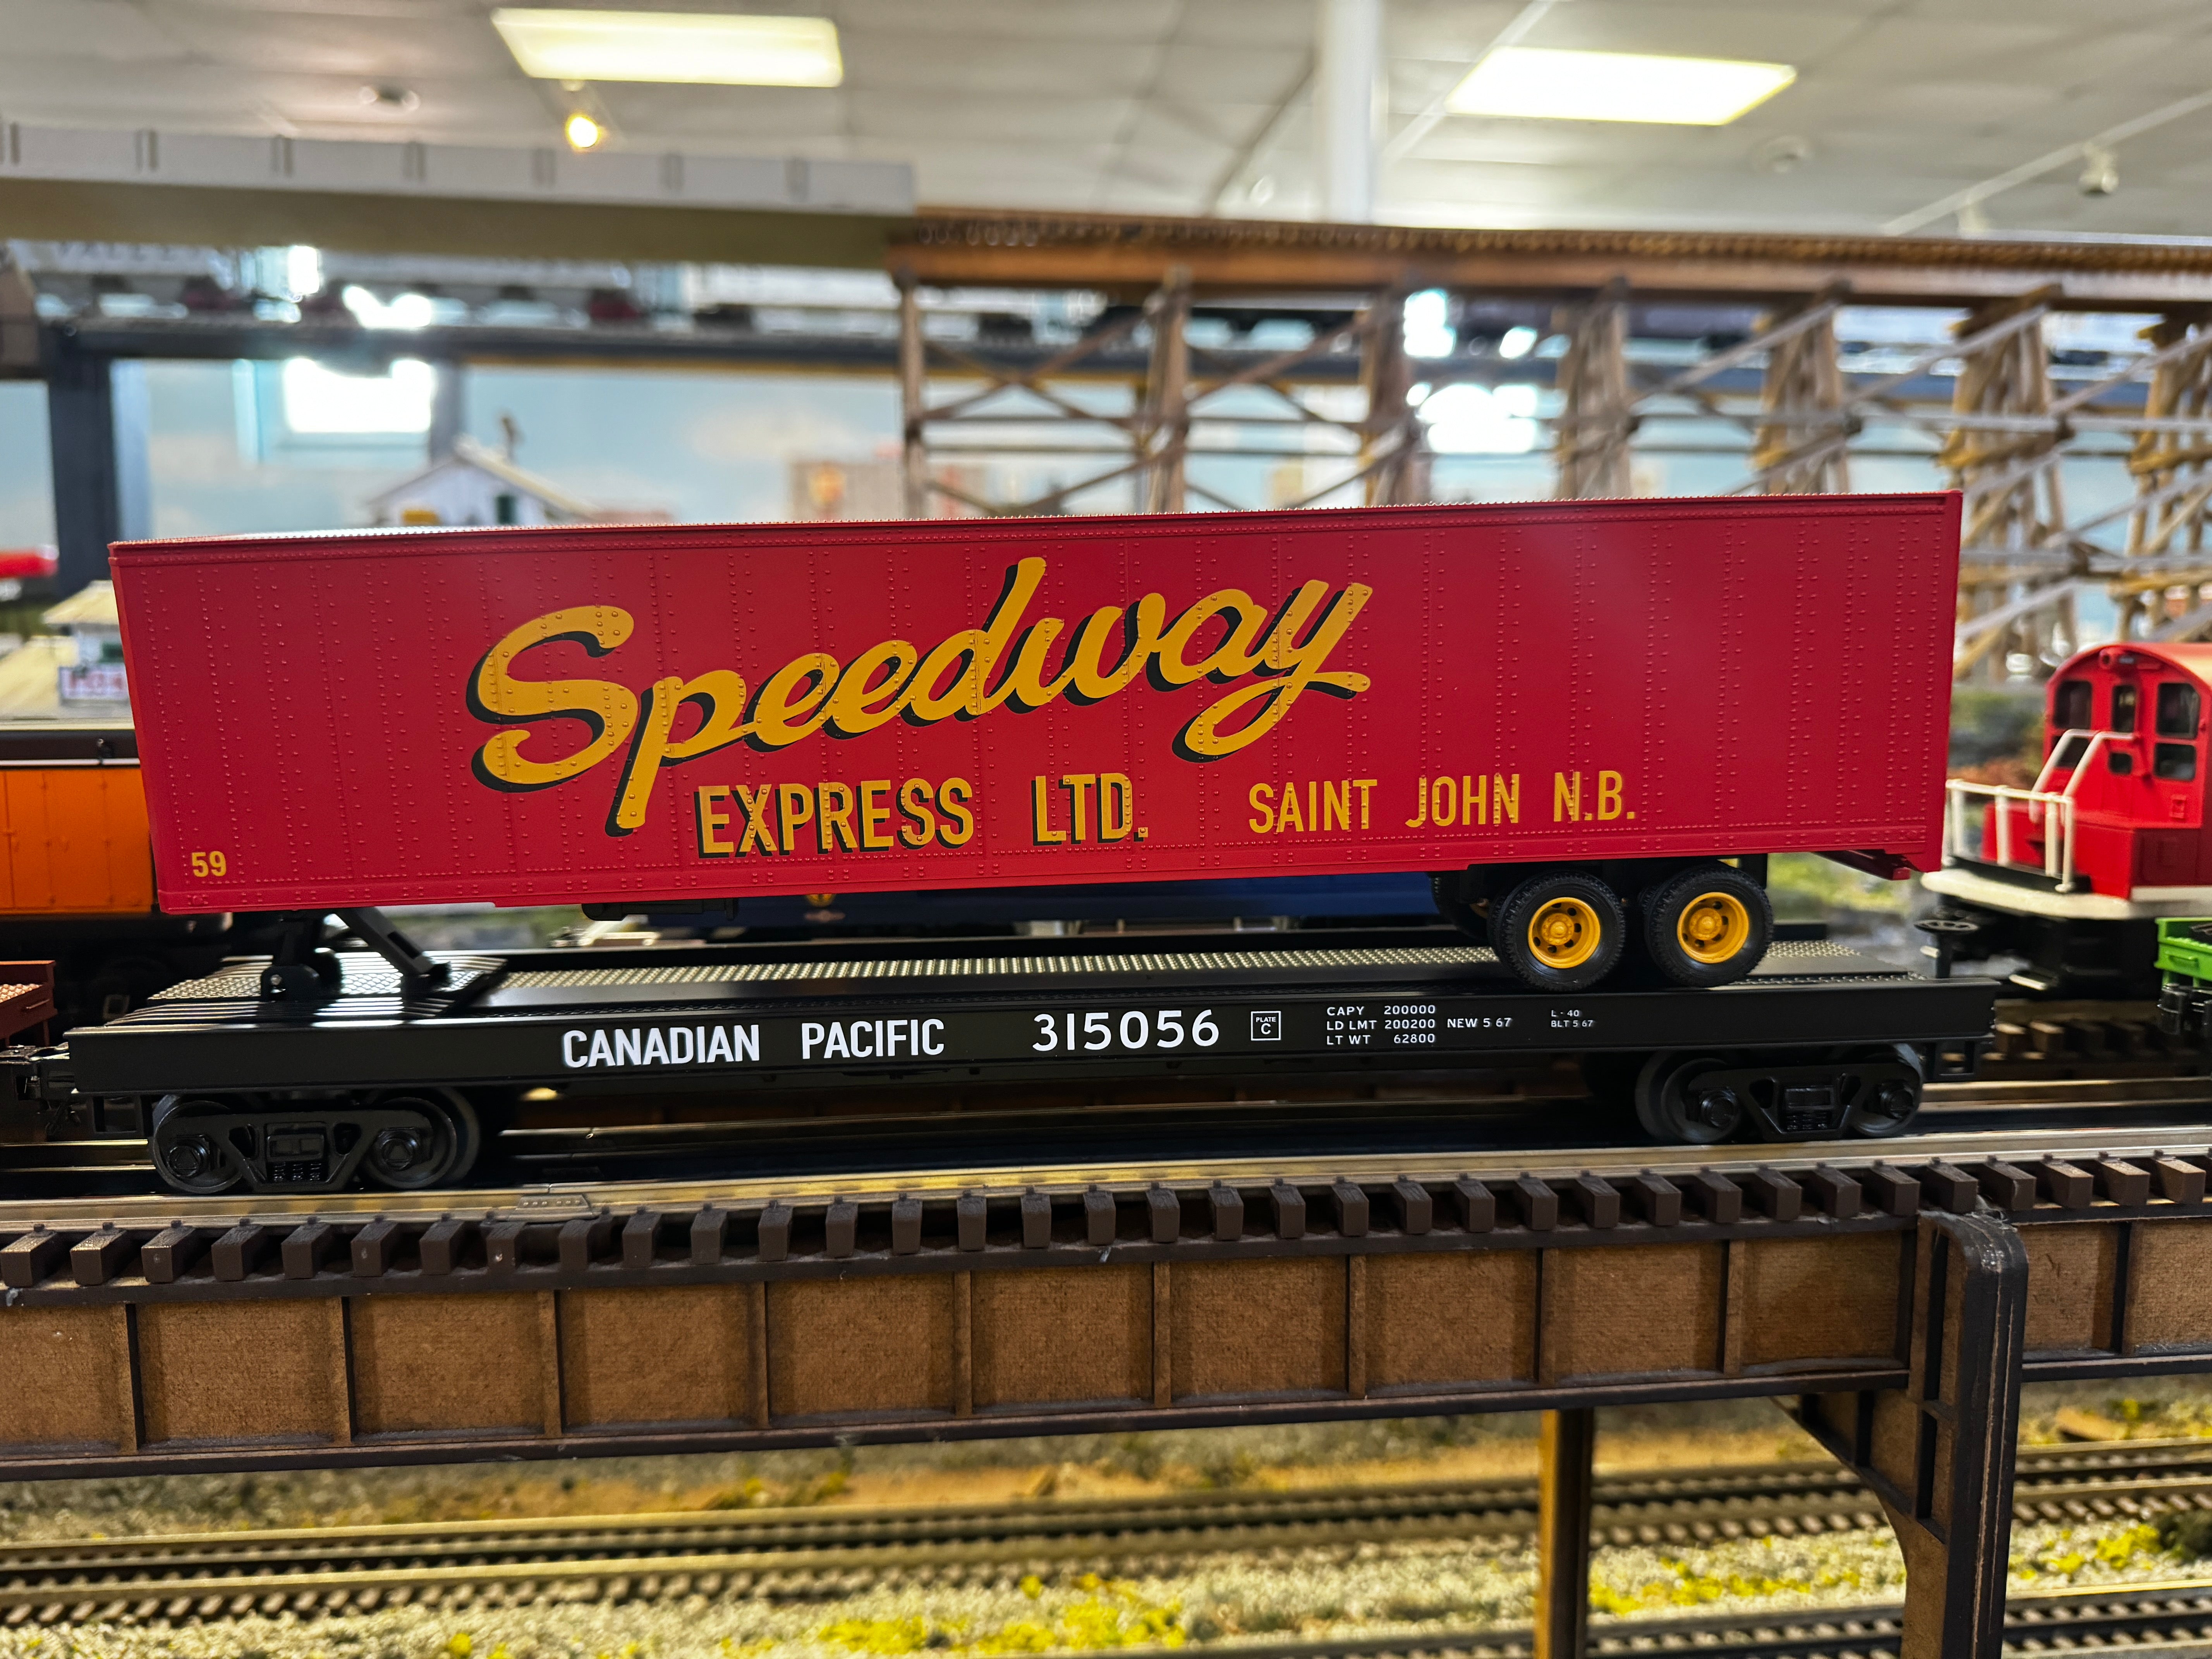 MTH 20-95642 - Flat Car "Canadian Pacific" w/ 48' Trailer